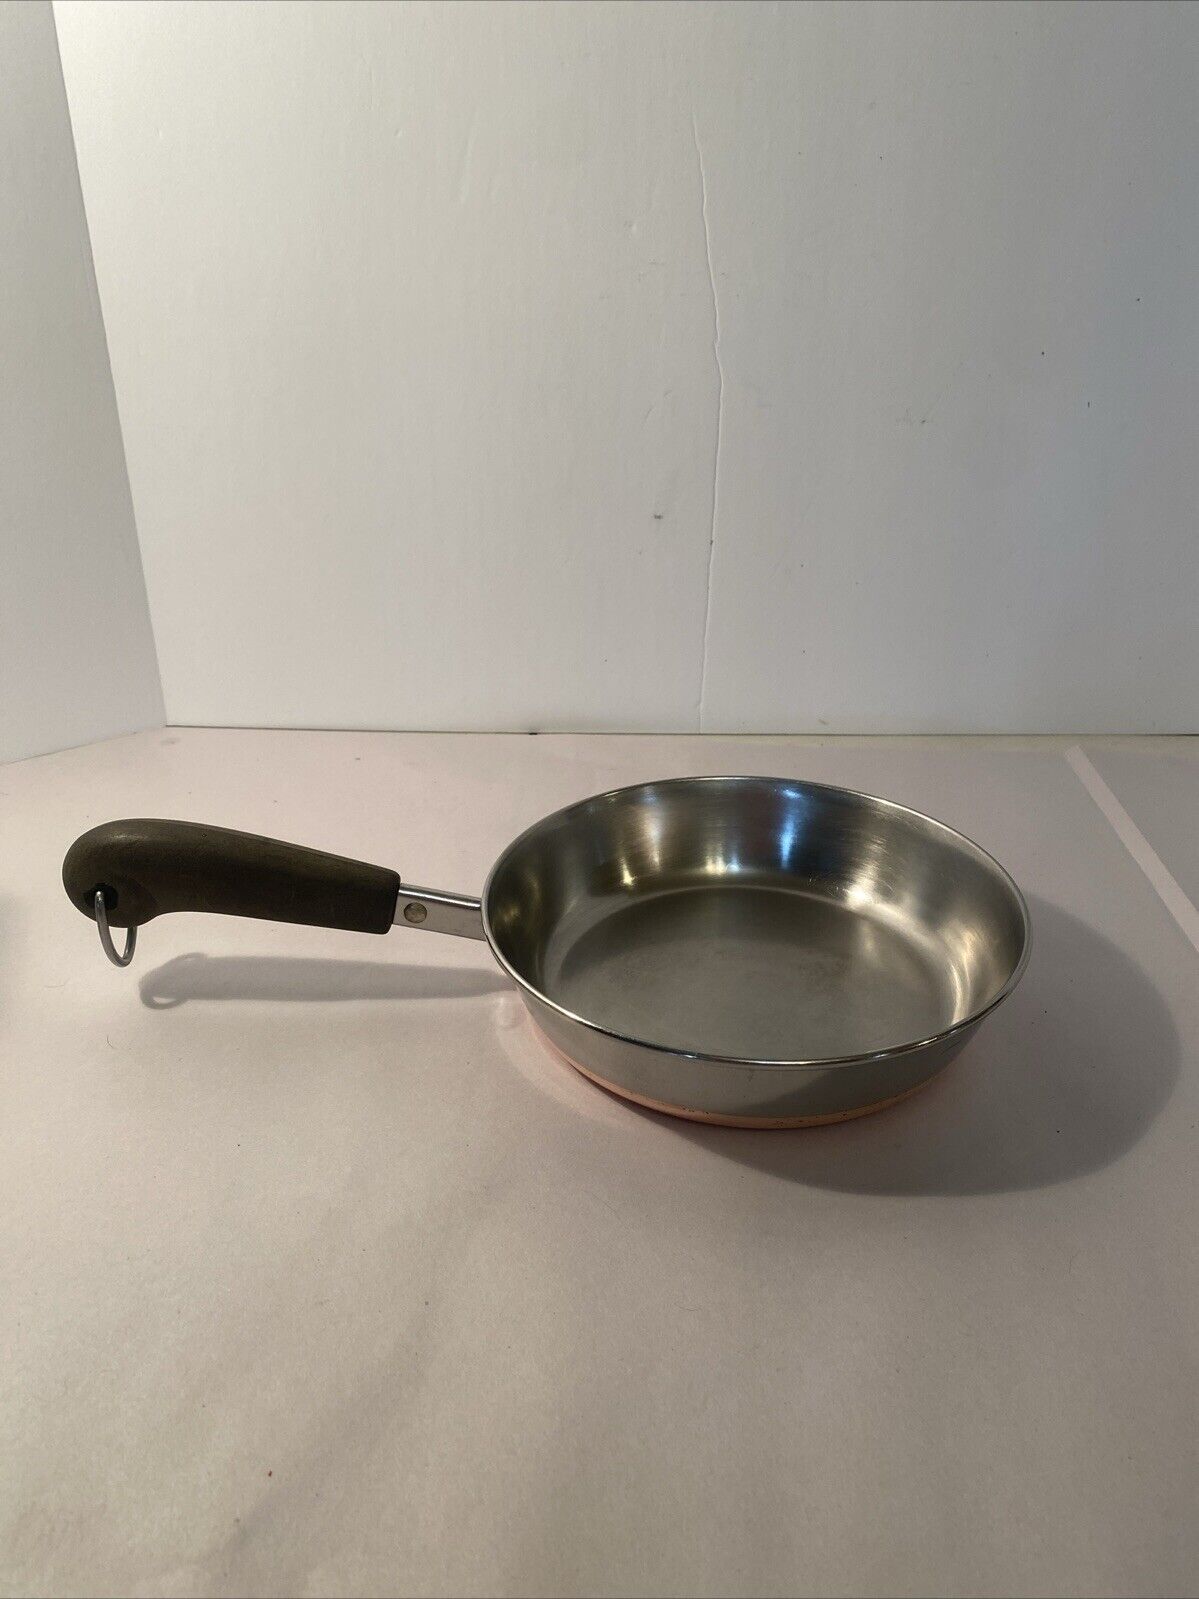 Vintage Revere Ware 7 Inch Copper Bottom Stainless Skillet Frying Pan No Lid